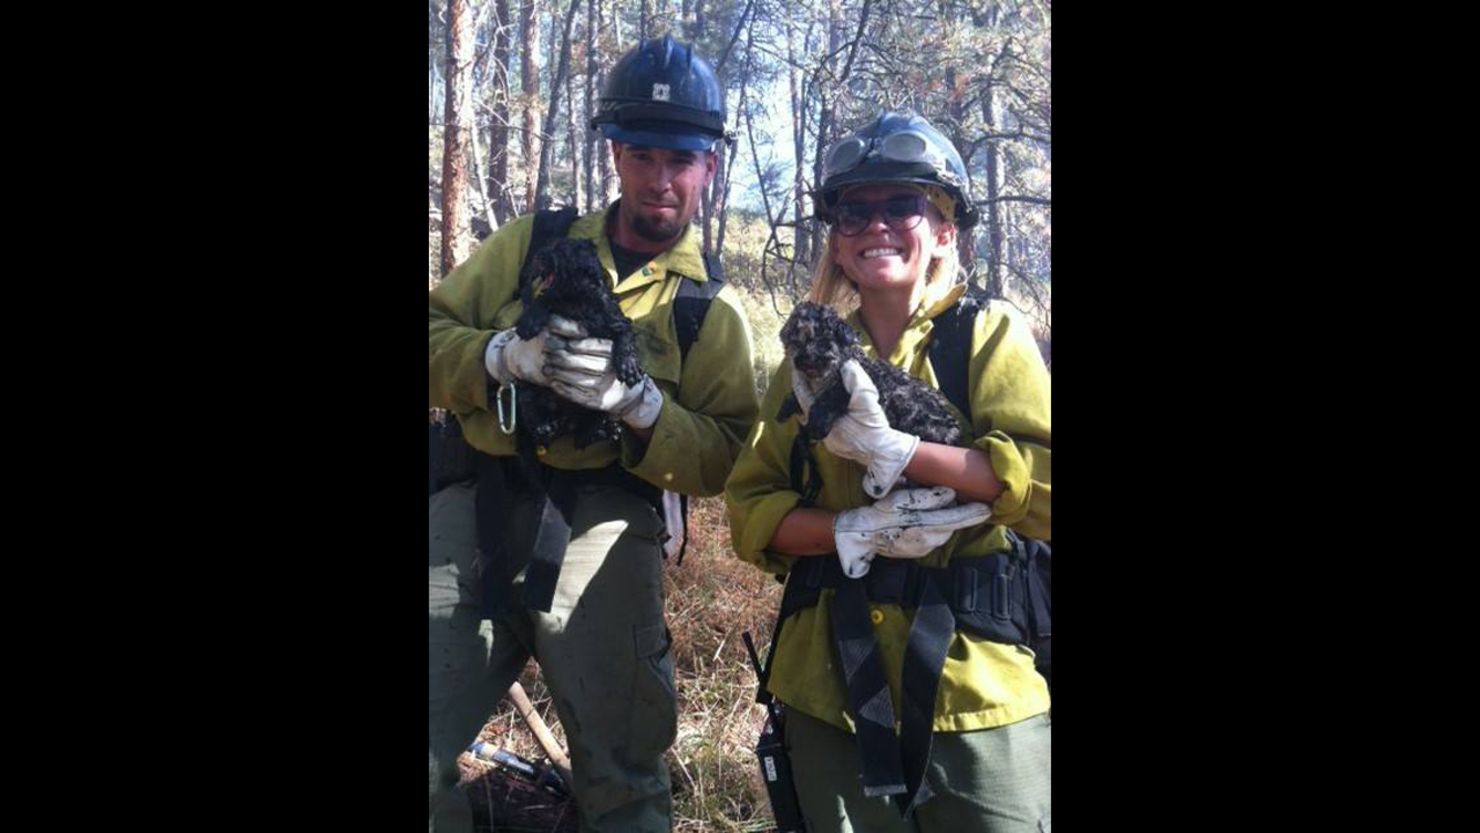 Jared Chandler and Sara Steele cuddle two mountain lions cubs saved from the fire. They were found under a burning log.